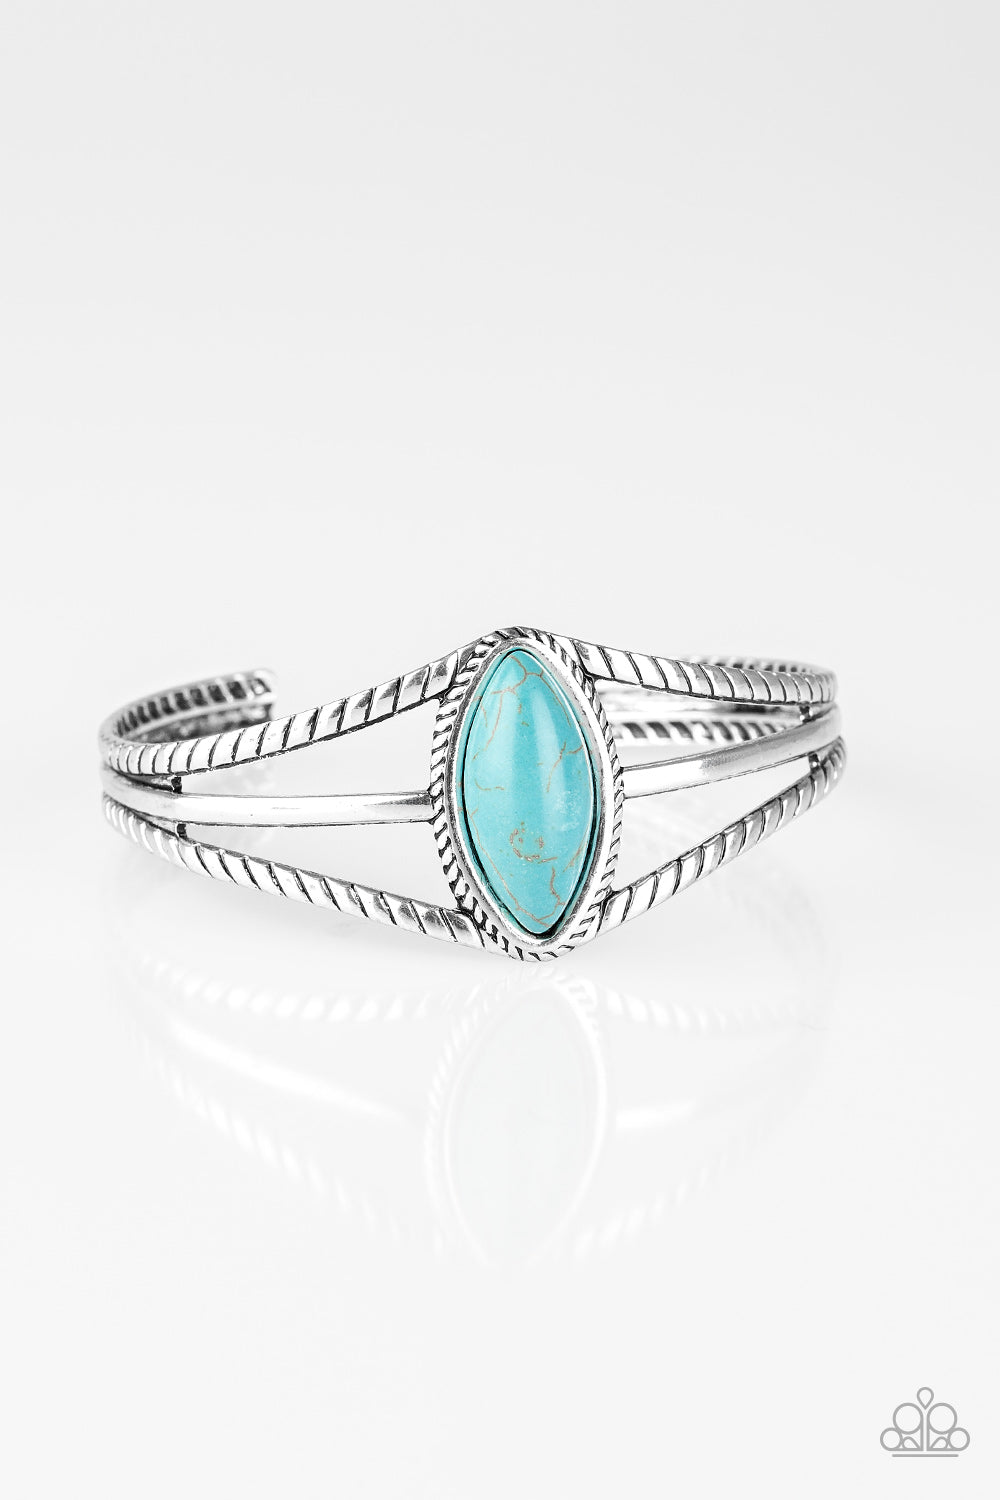 WESTERN WANDERER - BLUE MARQUISE TURQUOISE SILVER CUFF BRACELET